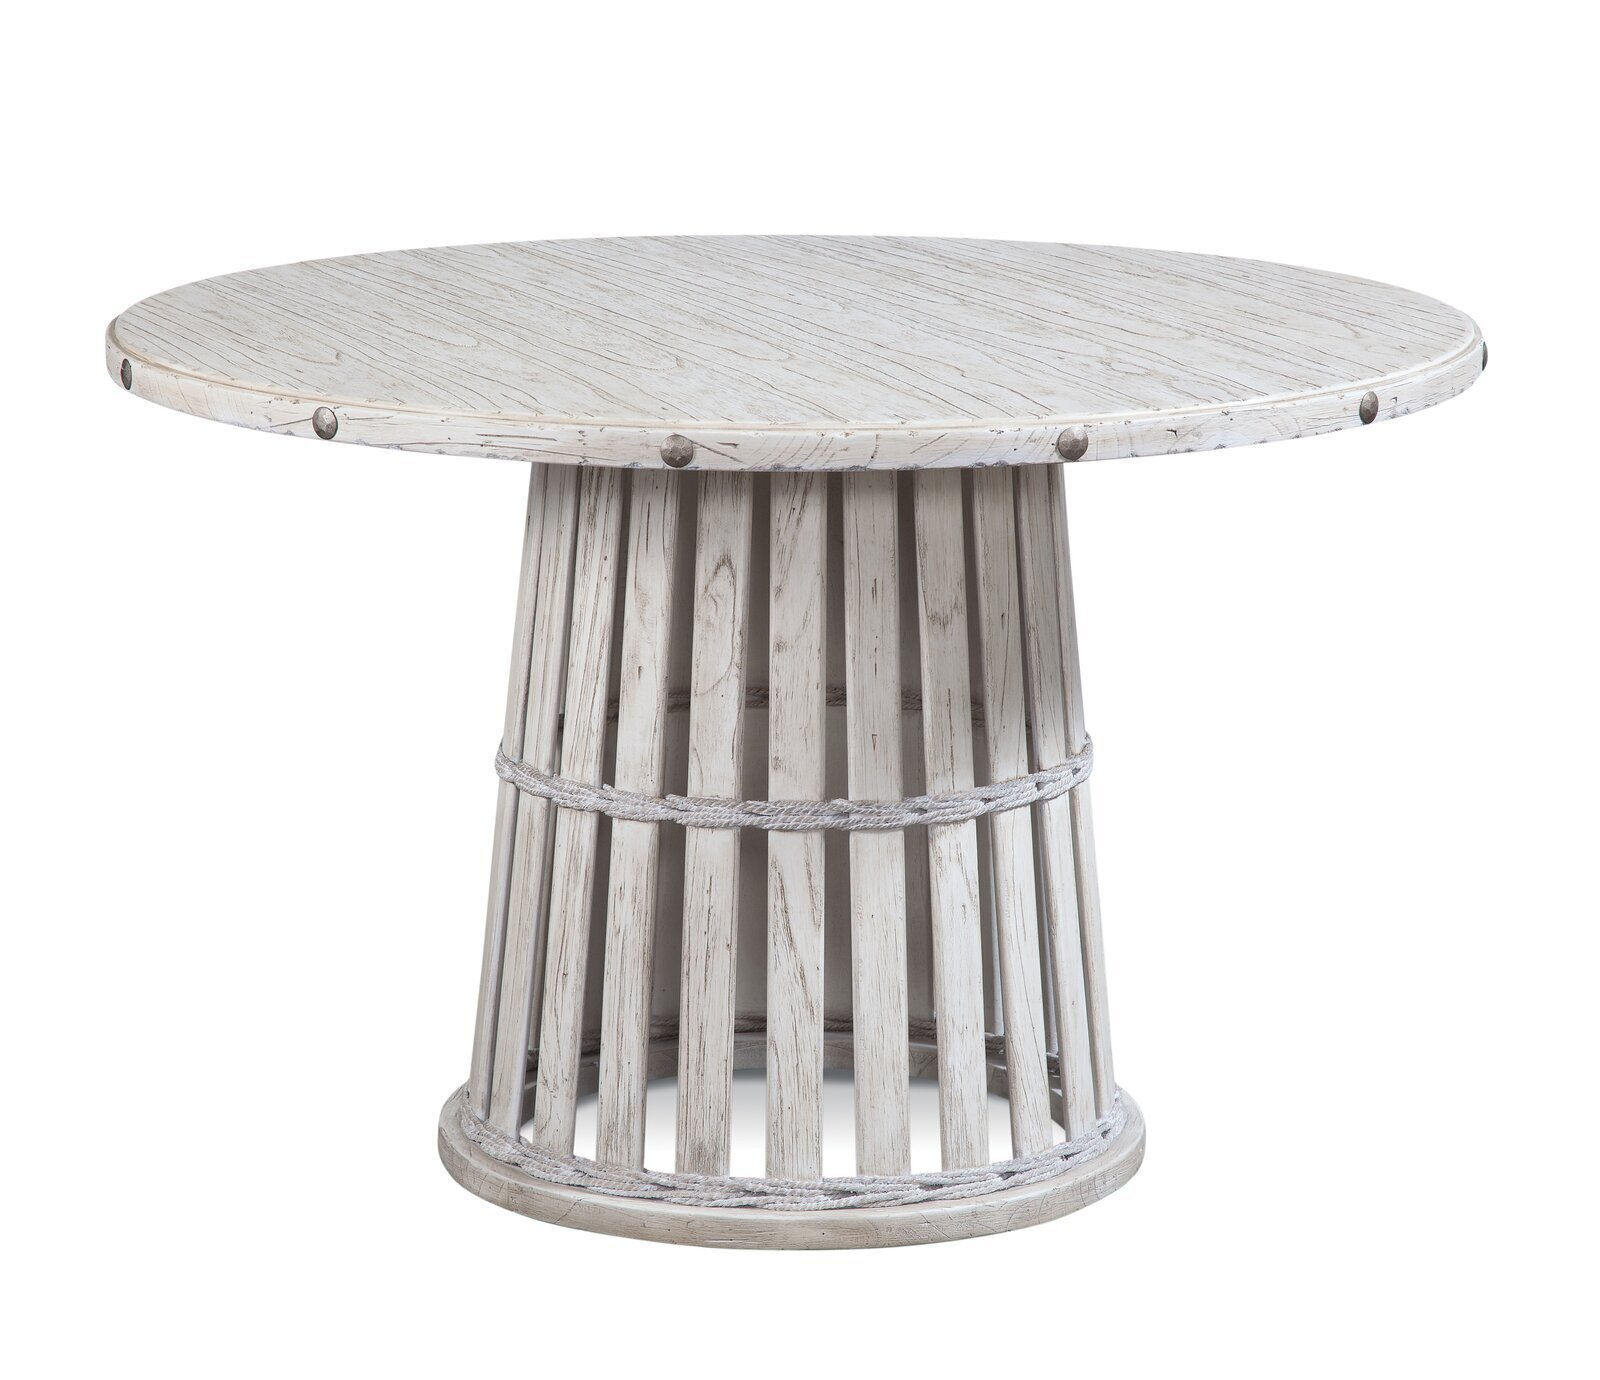 Round White Pedestal Dining Table With Nailhead